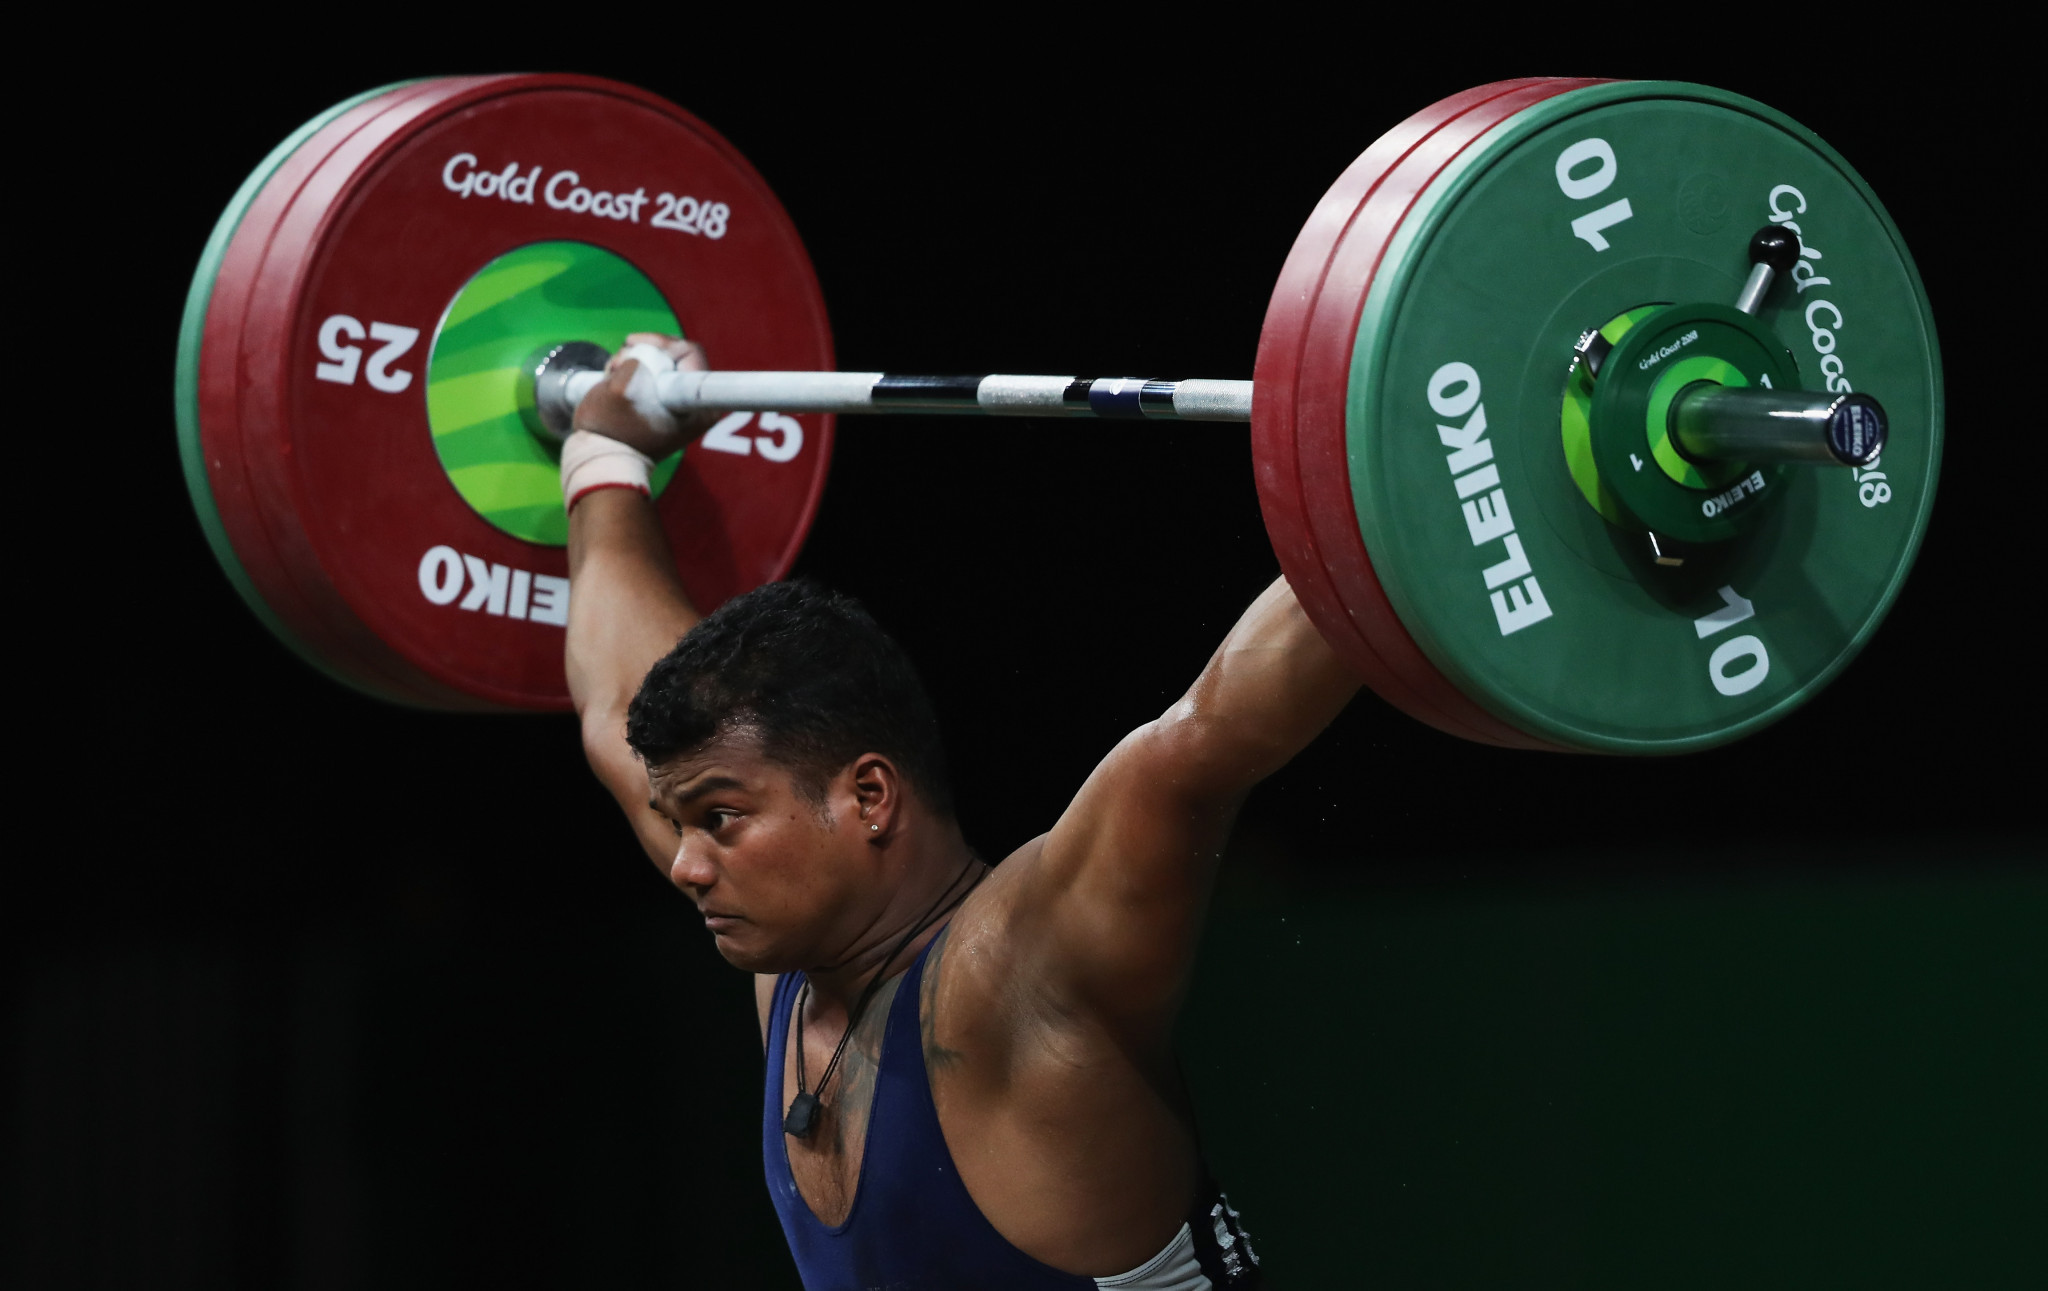 Venkat Rahul Ragala increased India's weightlifting gold medal tally to four with success in the men's 85kg event ©Getty Images